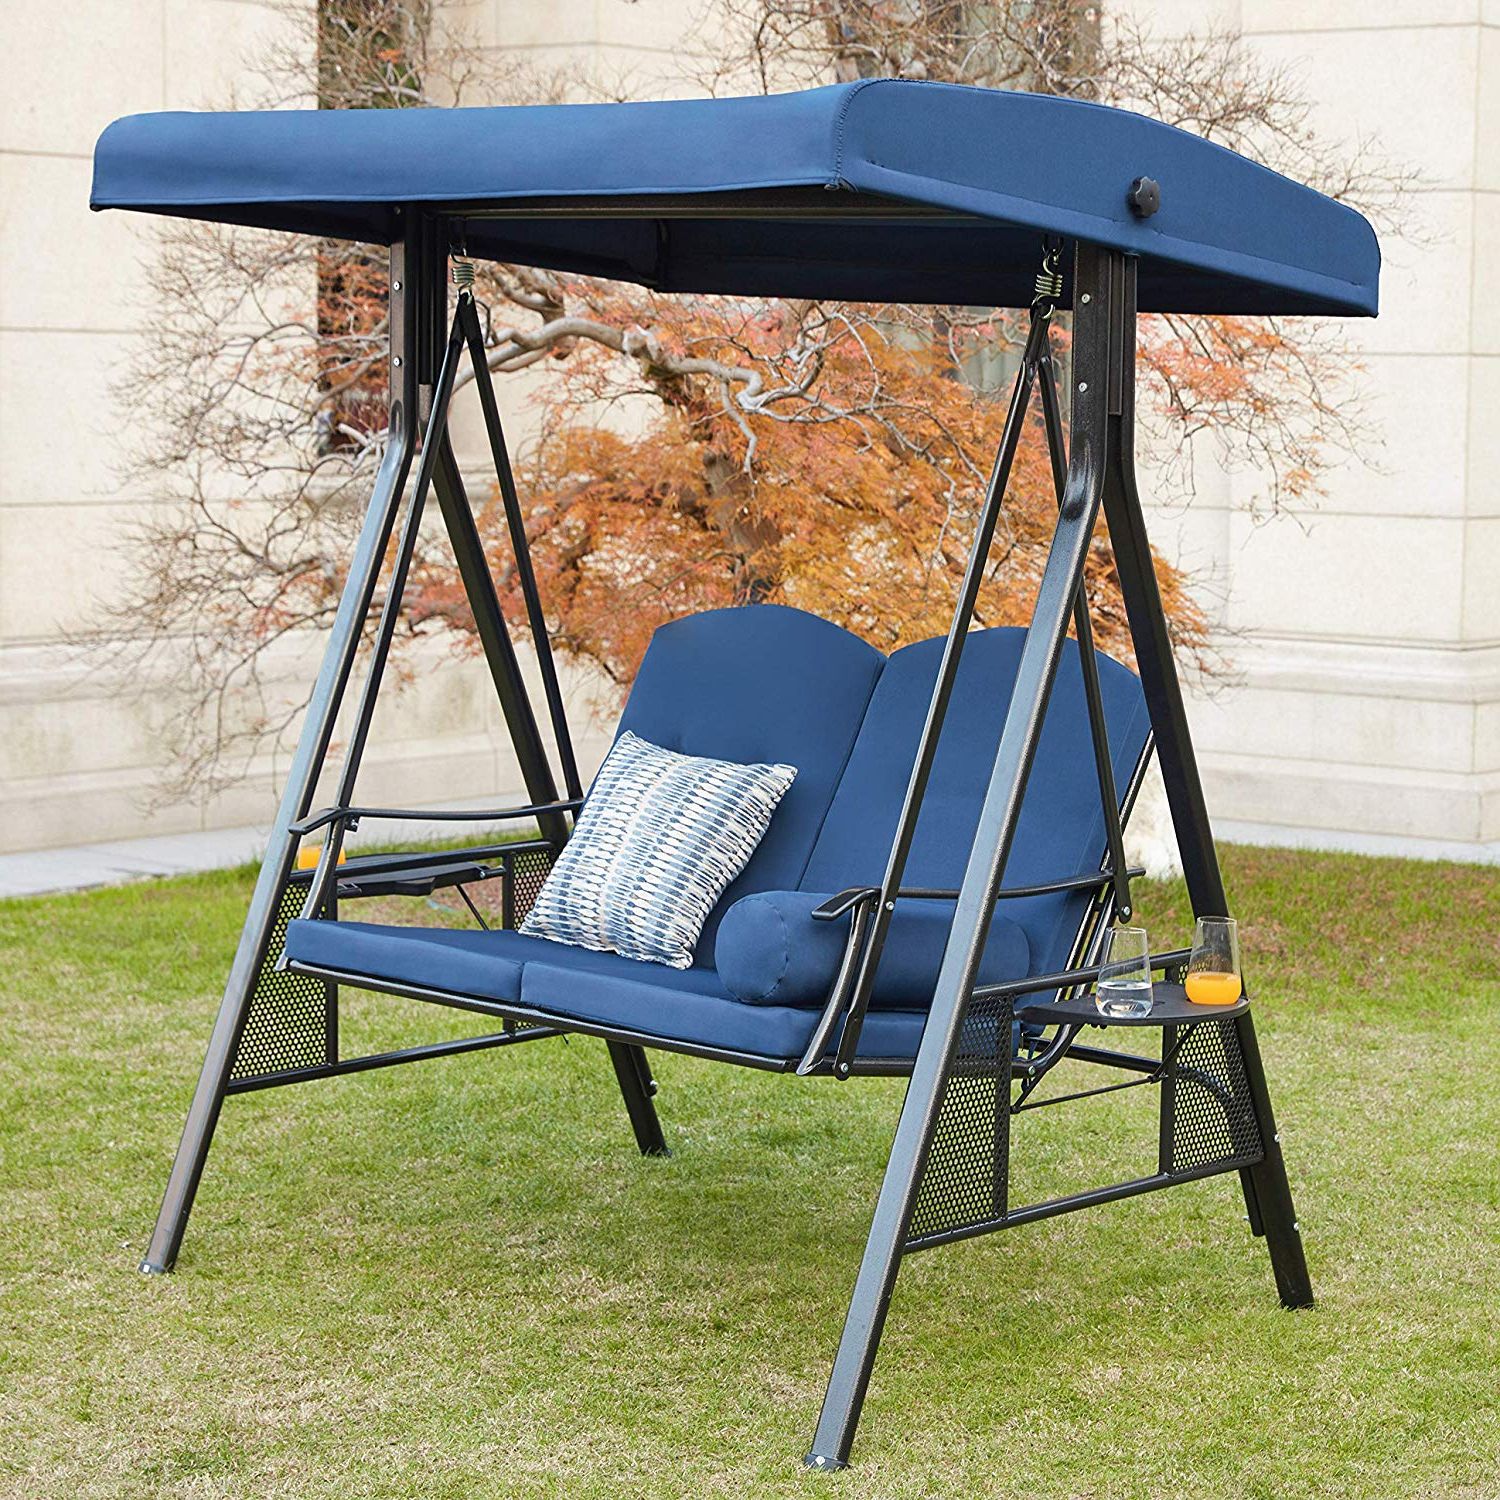 Lokatse Home 2 Person Canopy Outdoor Swing Chair Patio Hammock Cushions And  Teapoys Loveseat Bench Bed Furniture, 2 Seat Blue Pertaining To Recent Patio Loveseat Canopy Hammock Porch Swings With Stand (View 24 of 30)